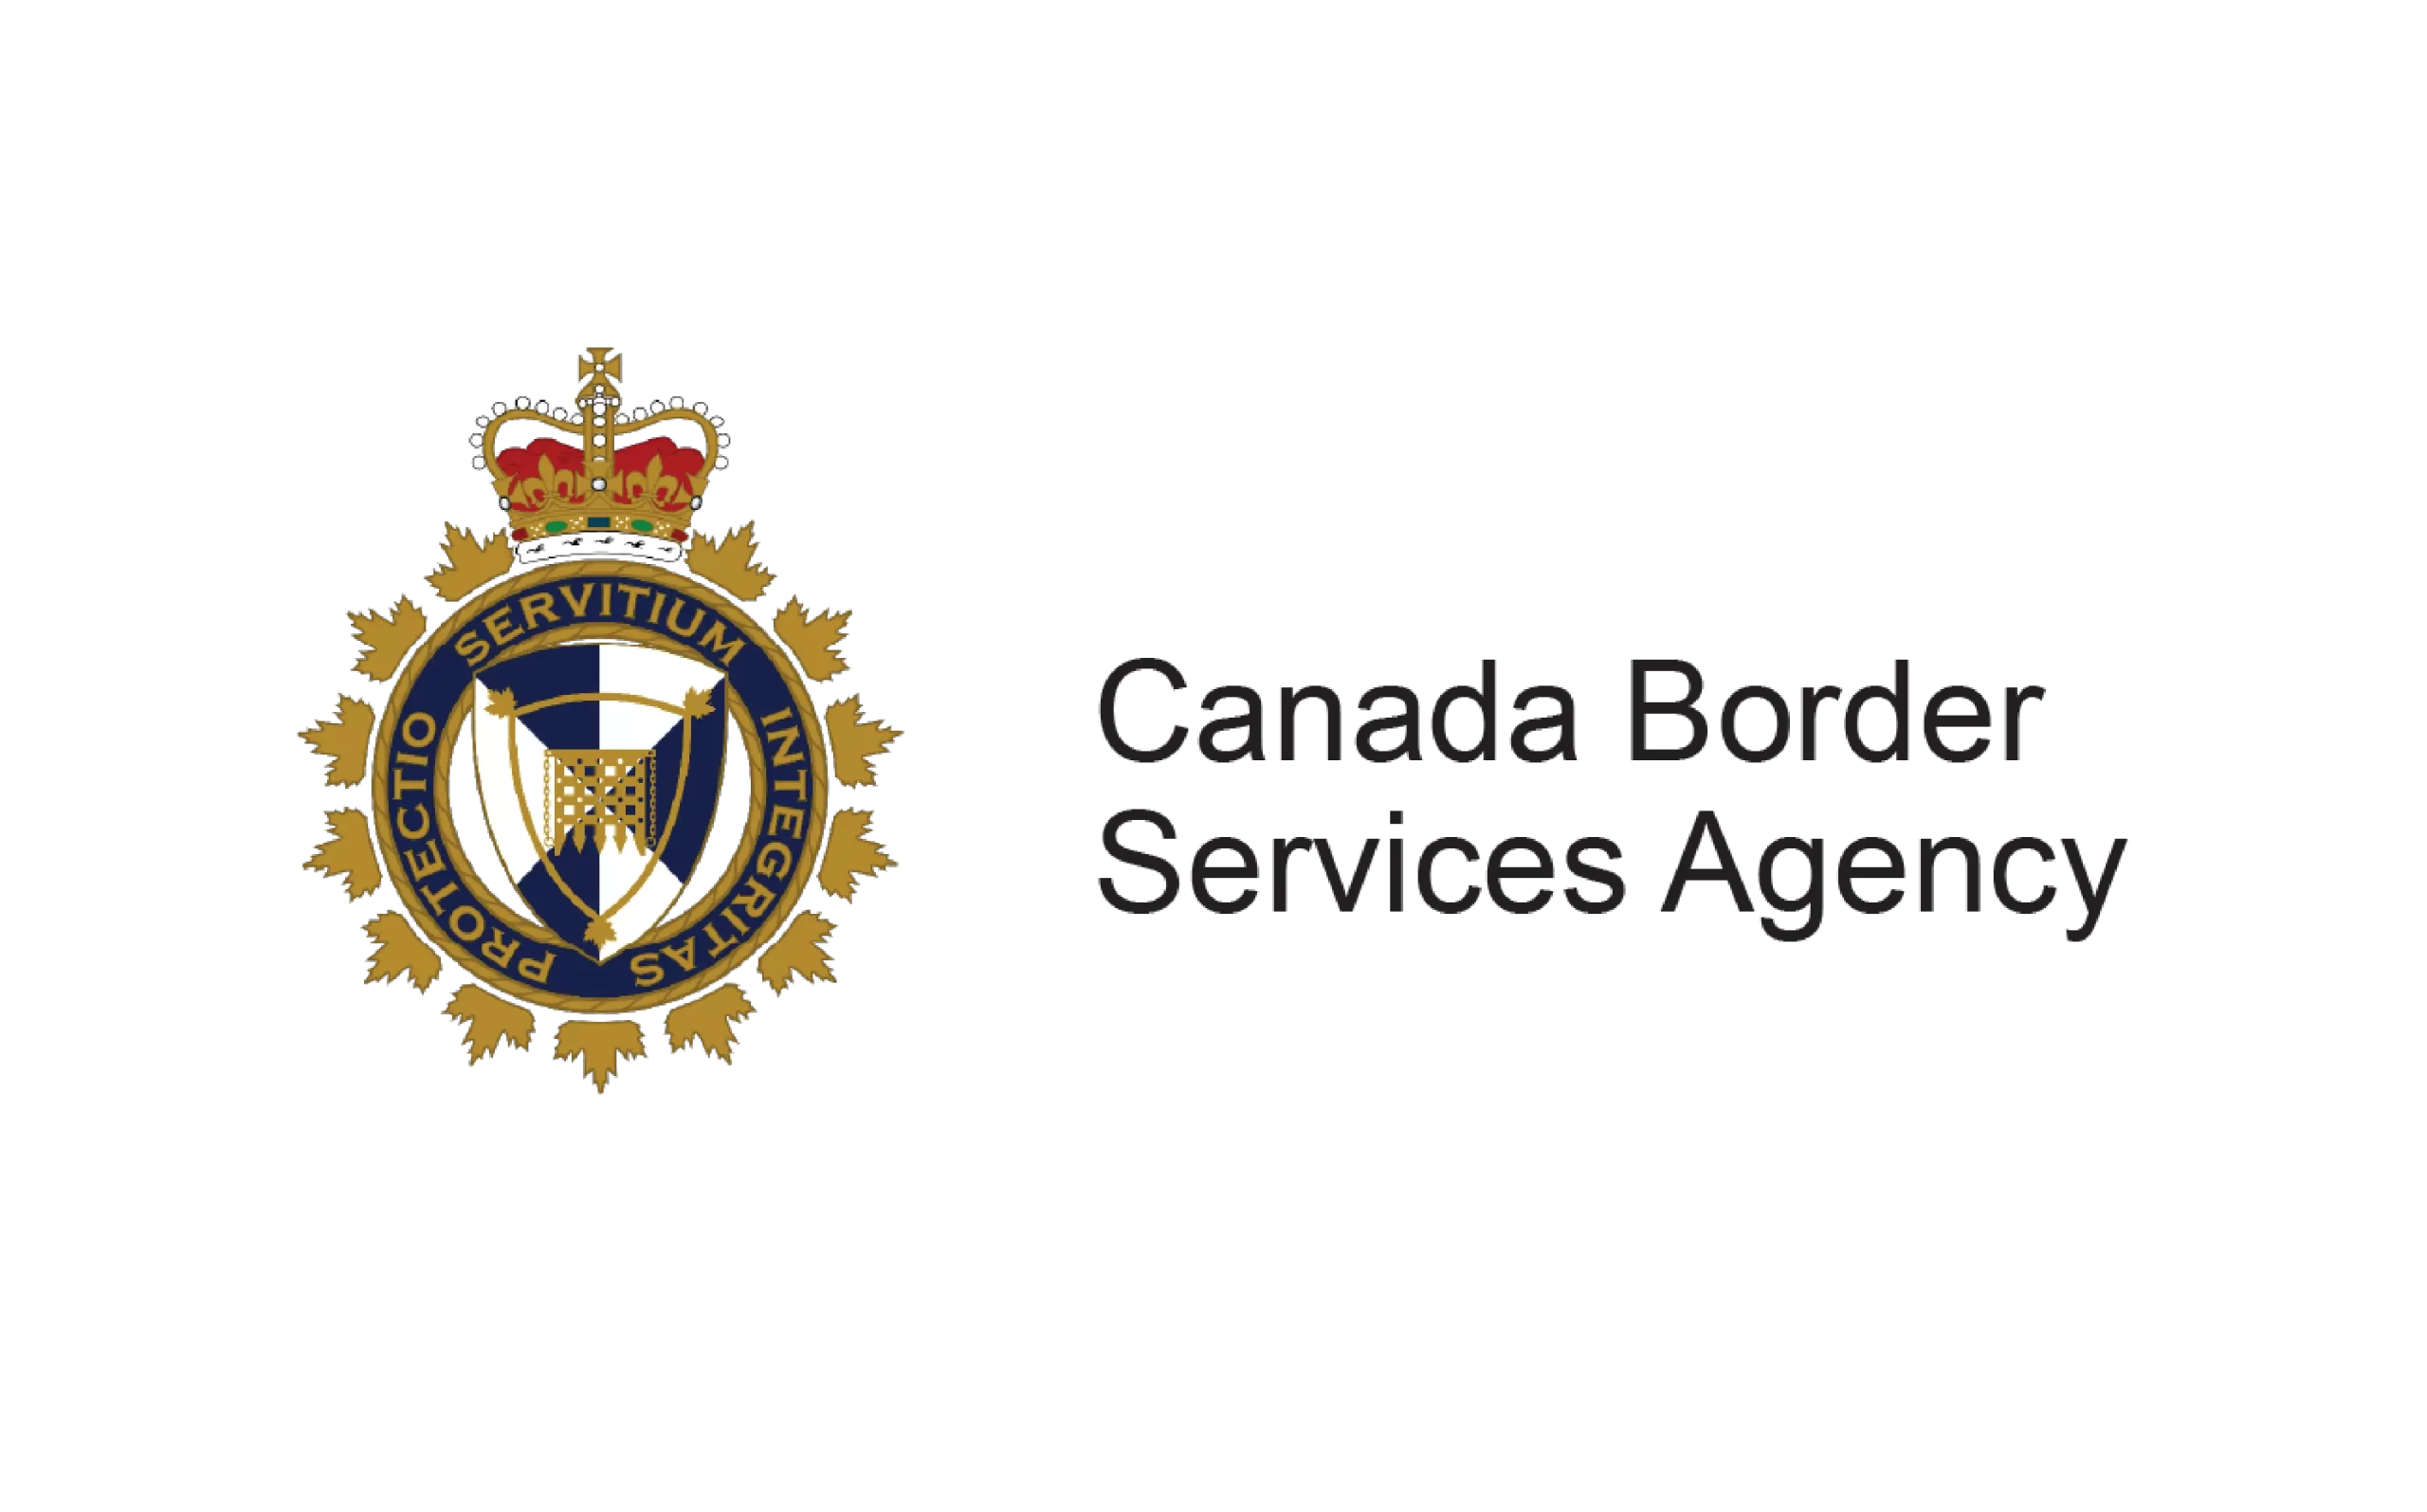 Gold, red, and blue Canada Border Services Agency logo